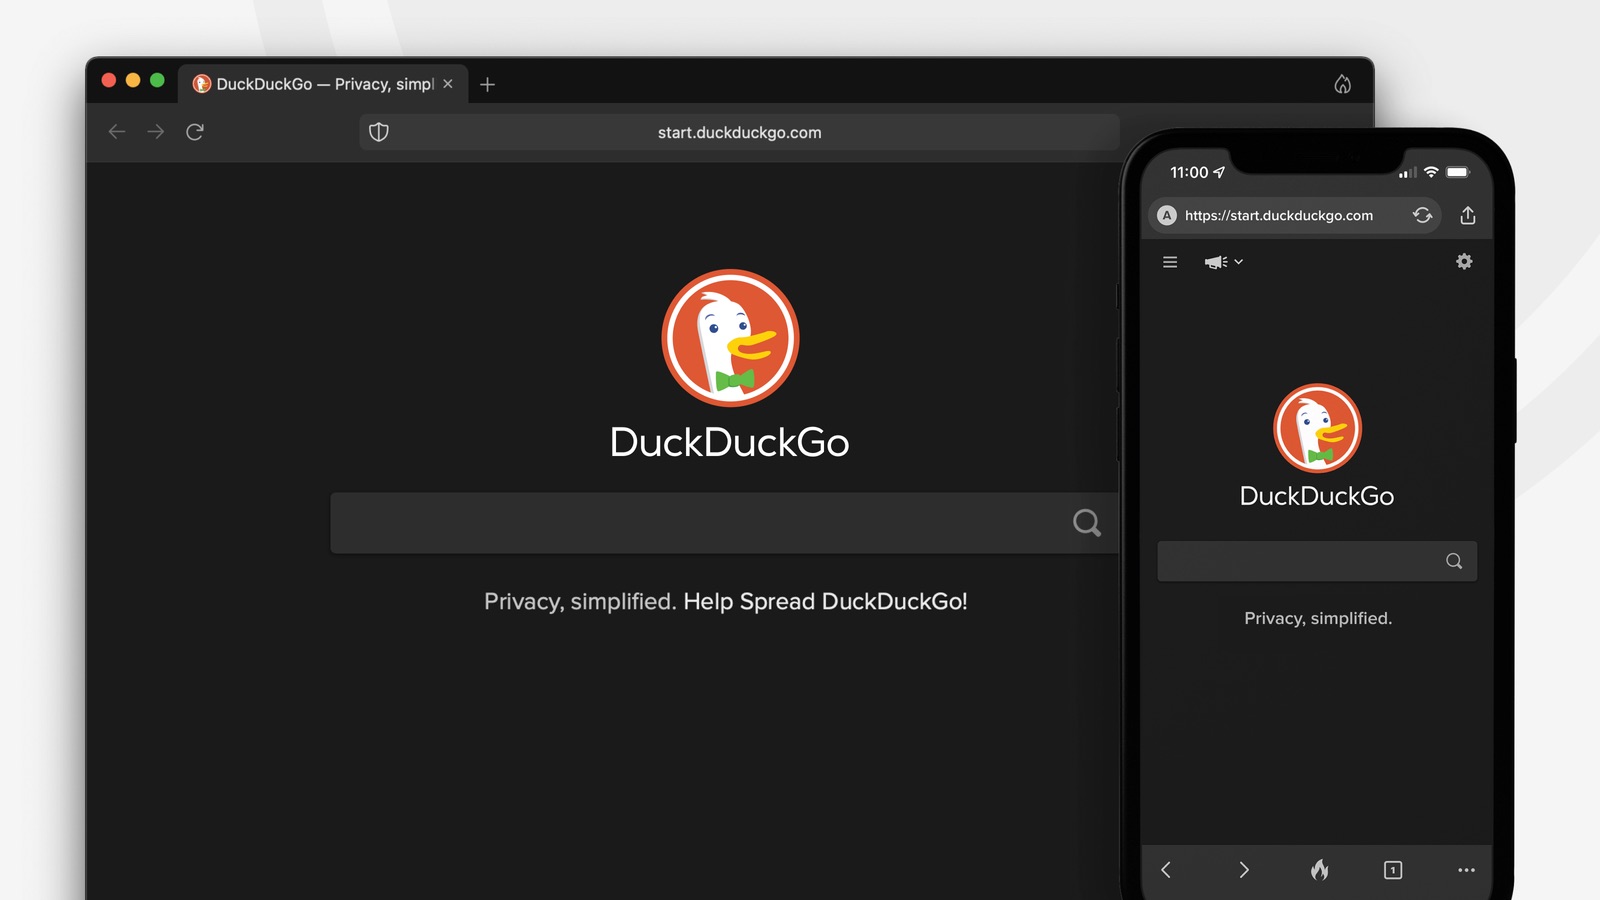 Promotional image showing the DuckDuckGo browser on Mac and iPhone